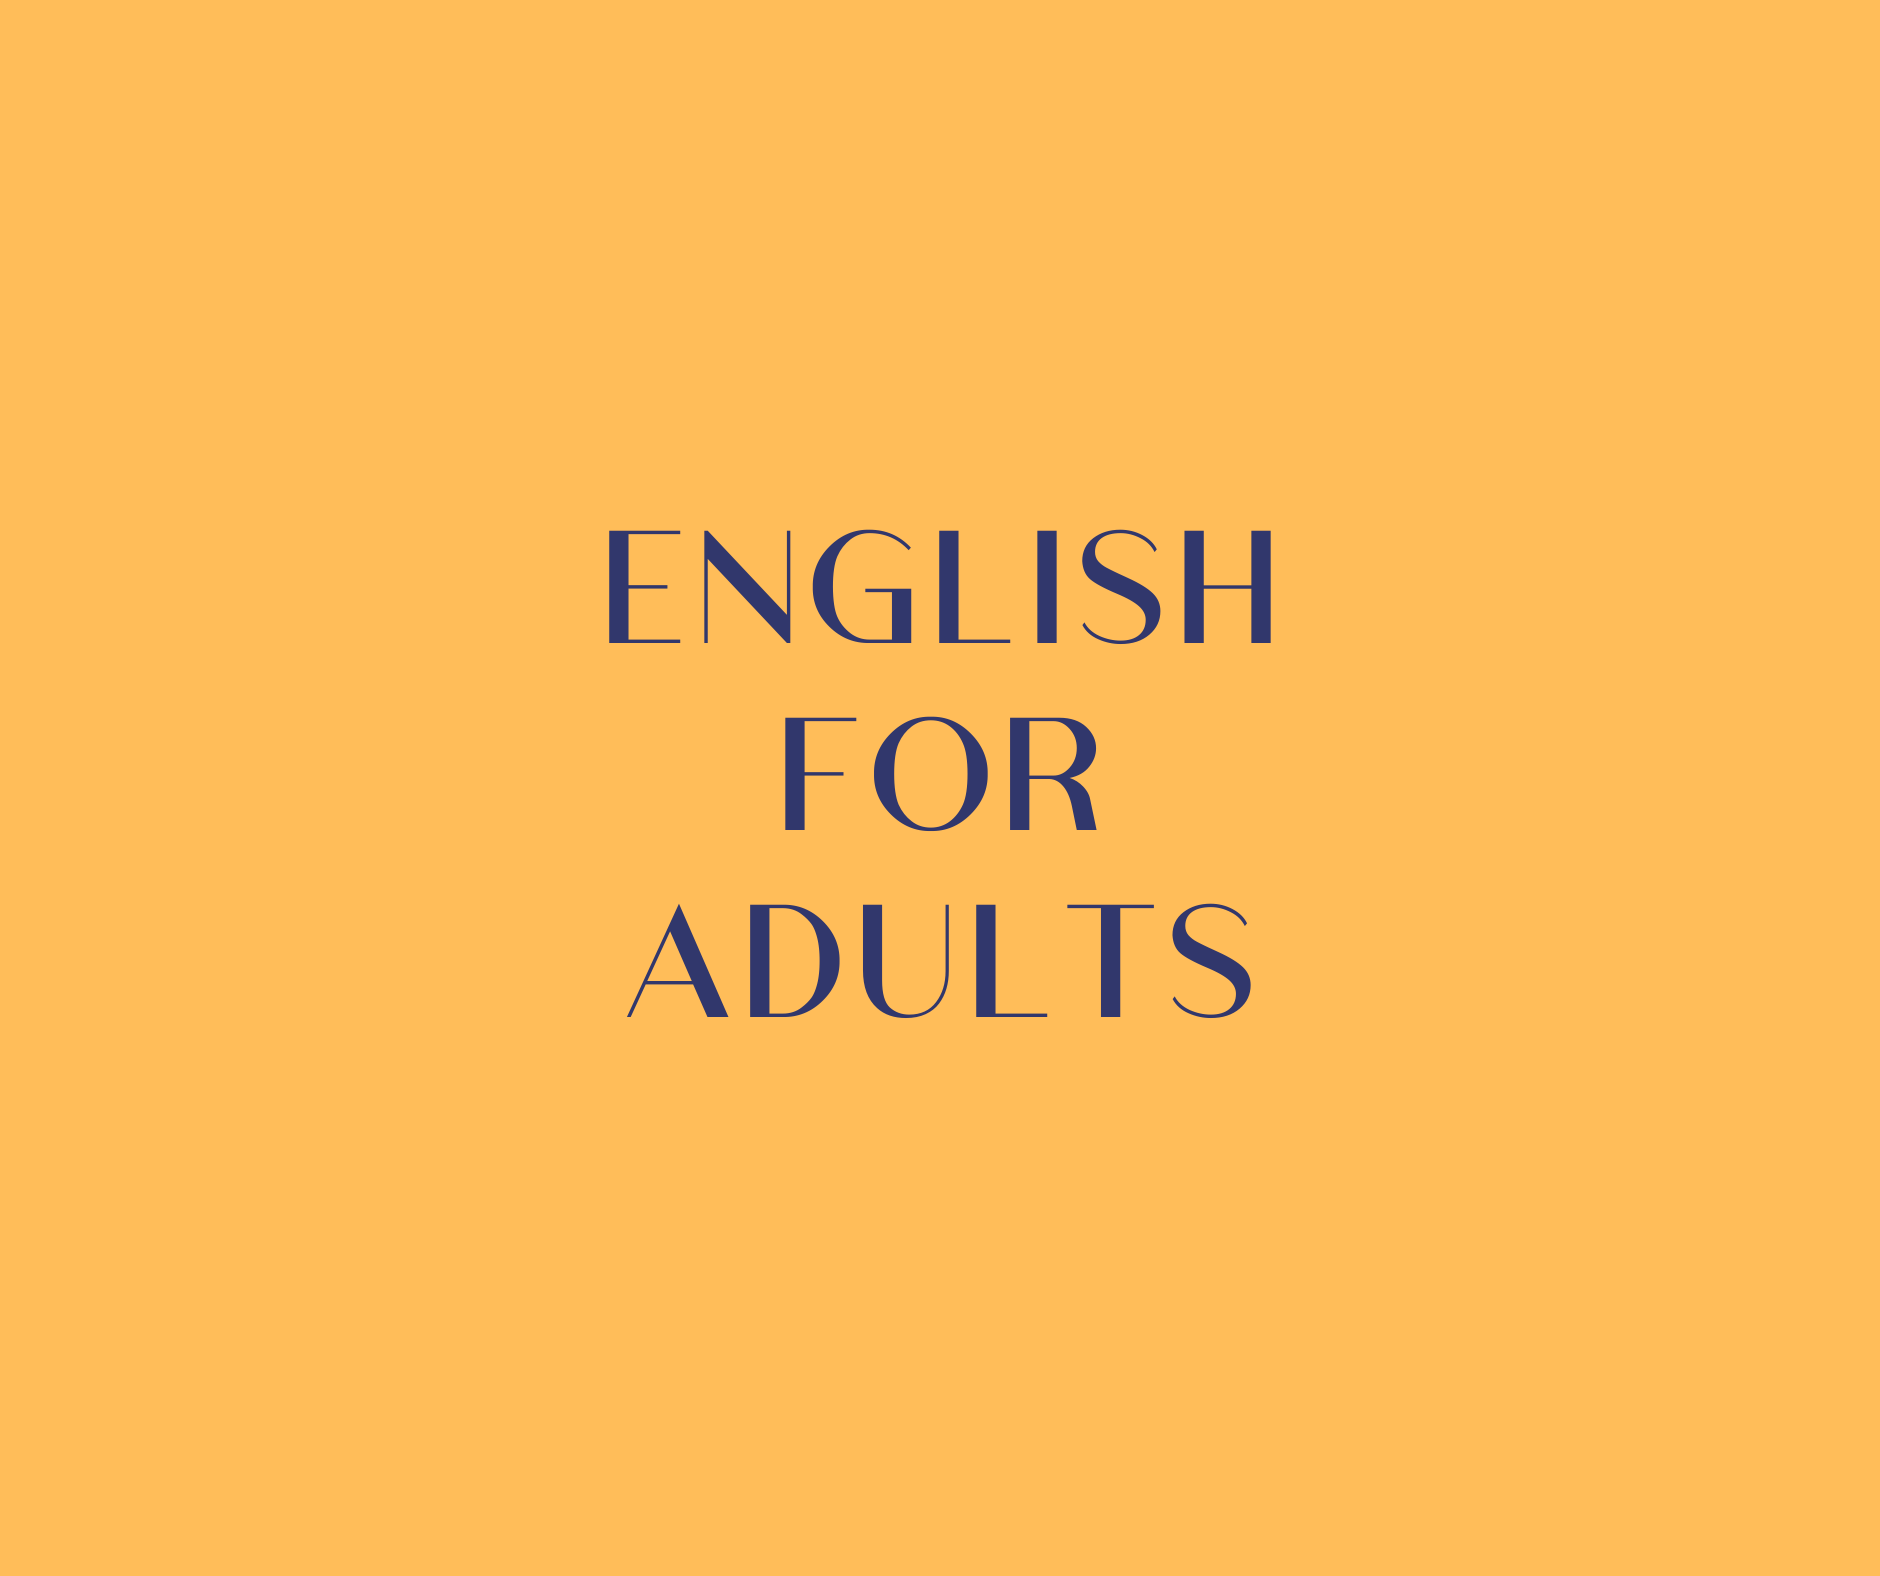 English for adults